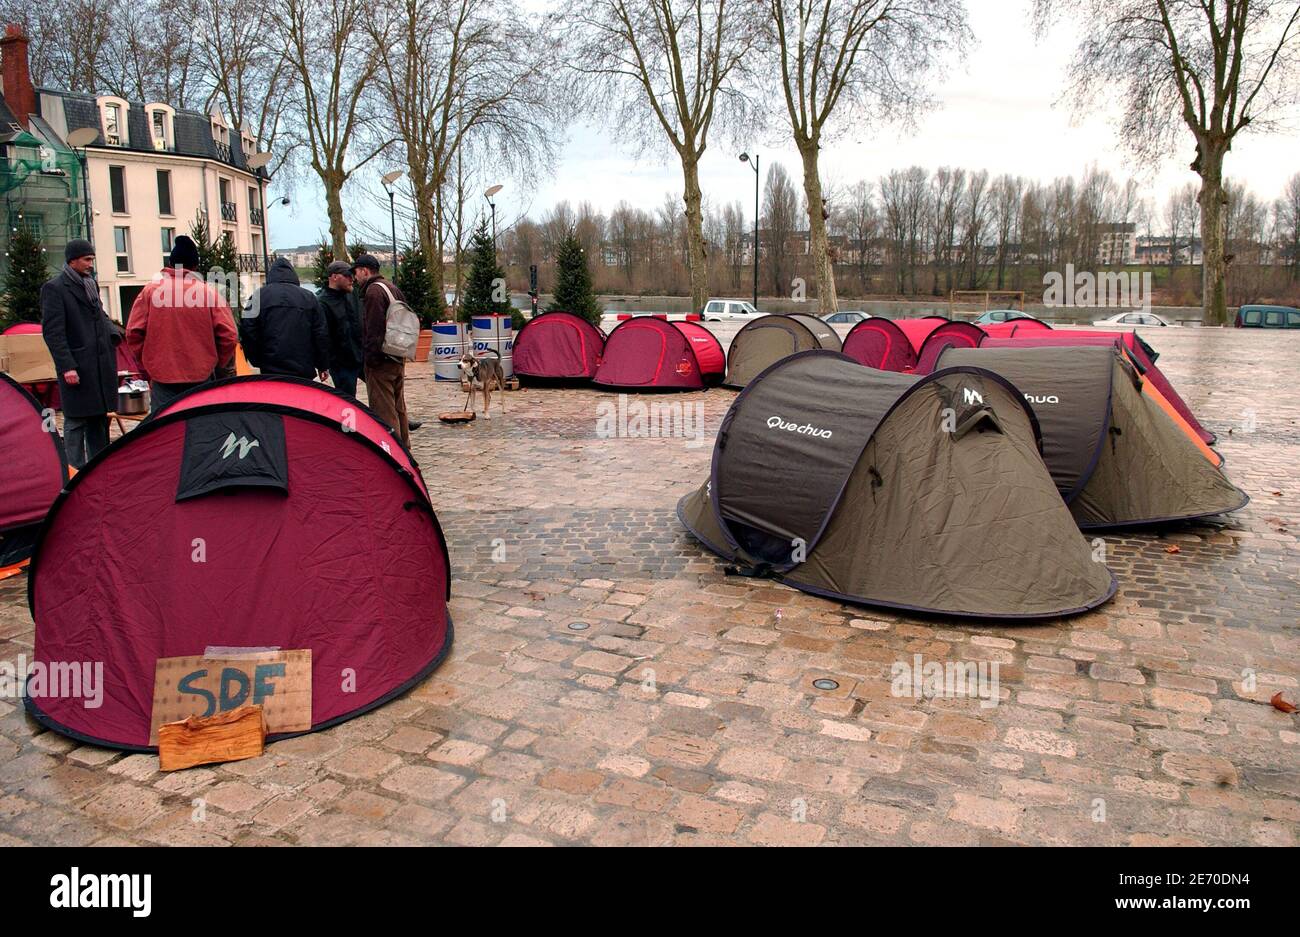 Homelesses live in tents installed near the Loire's quay in Orleans, France,  on December 30, 2006. The French association 'Enfants de Don Quichotte'  (Children of Don Quichotte) draws attention to the need